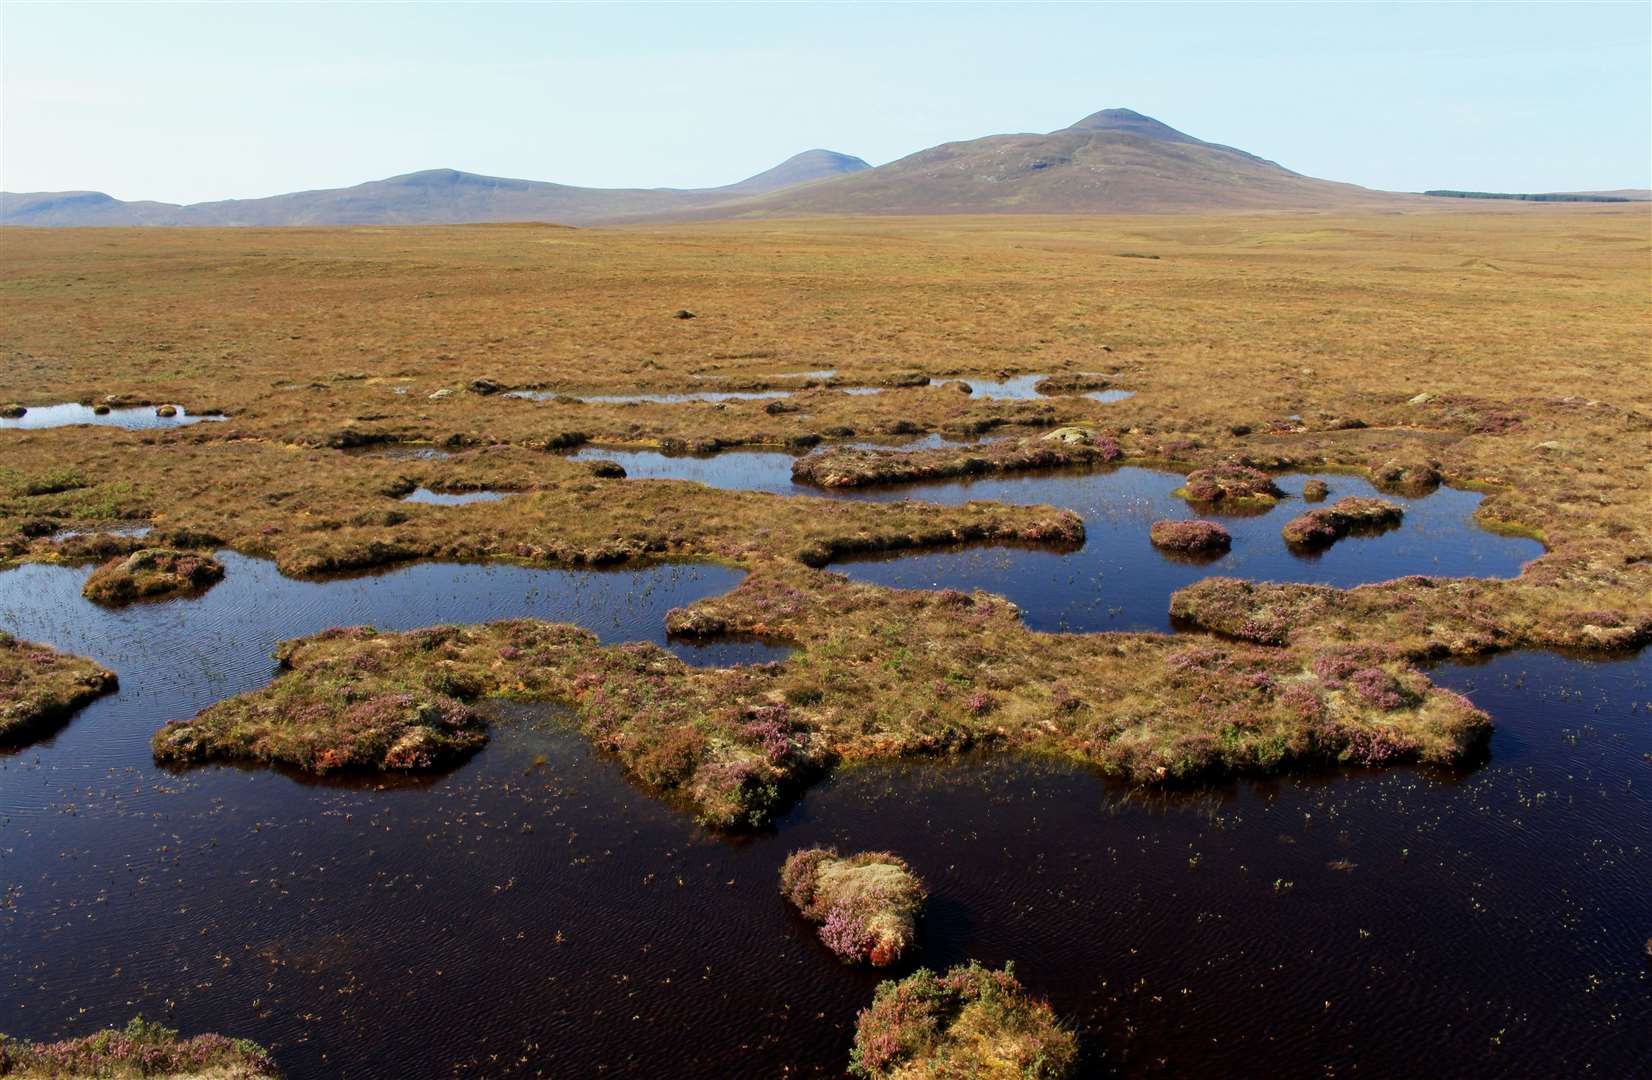 Incentives are already in place for peat landscapes like the Flow Country but some groups want more protection for Scotland's landscapes.